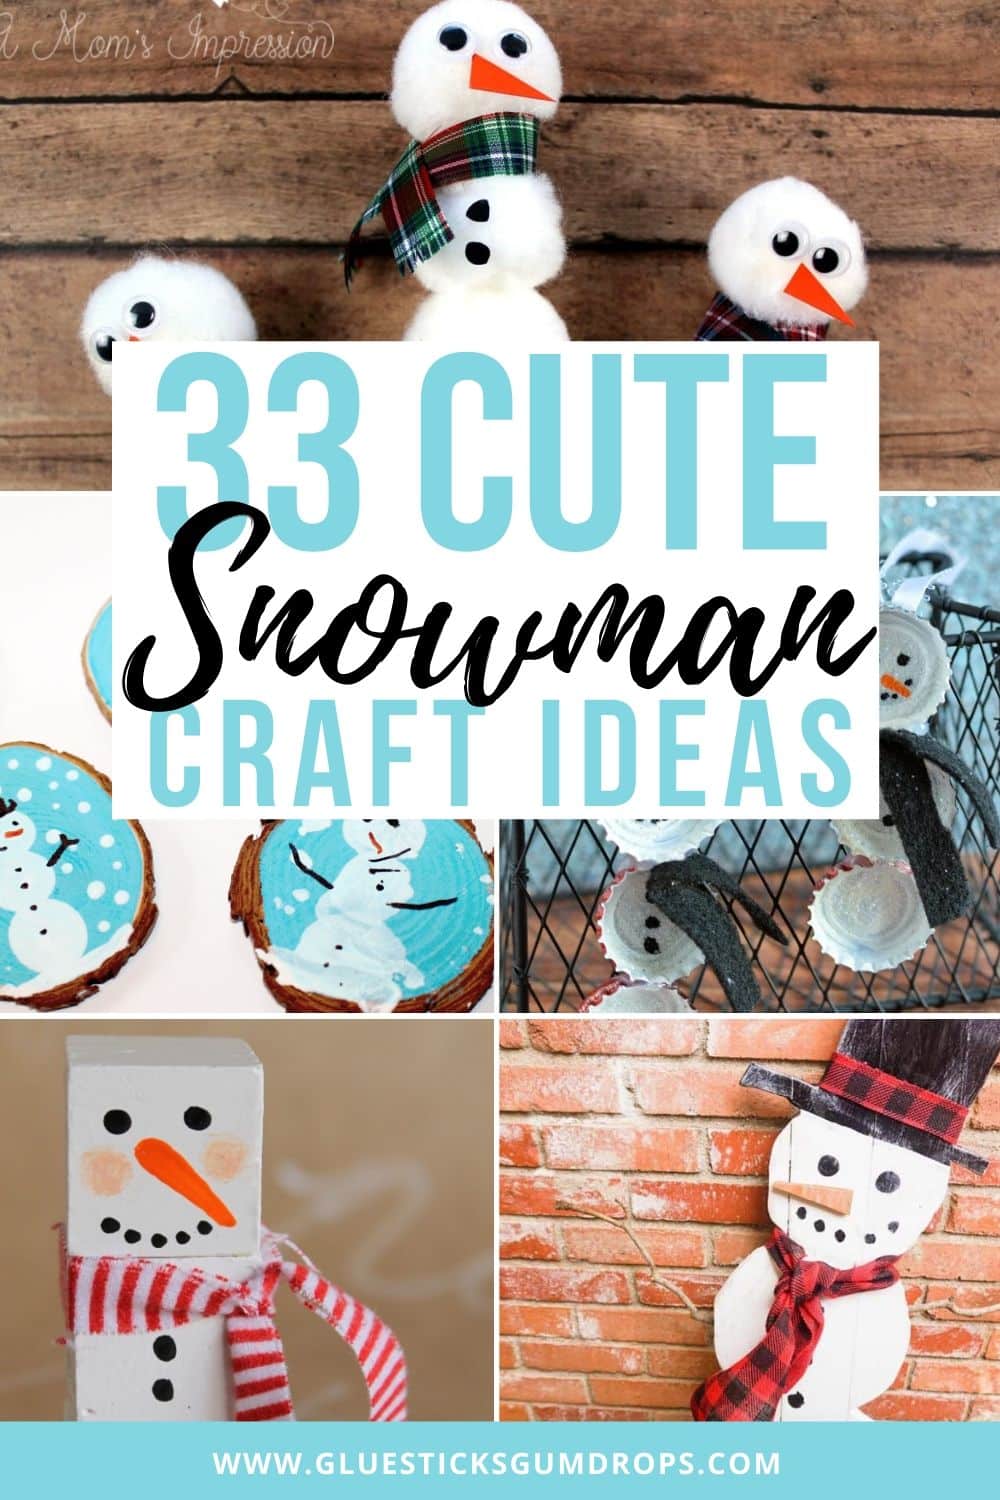 collage of various snowman crafts